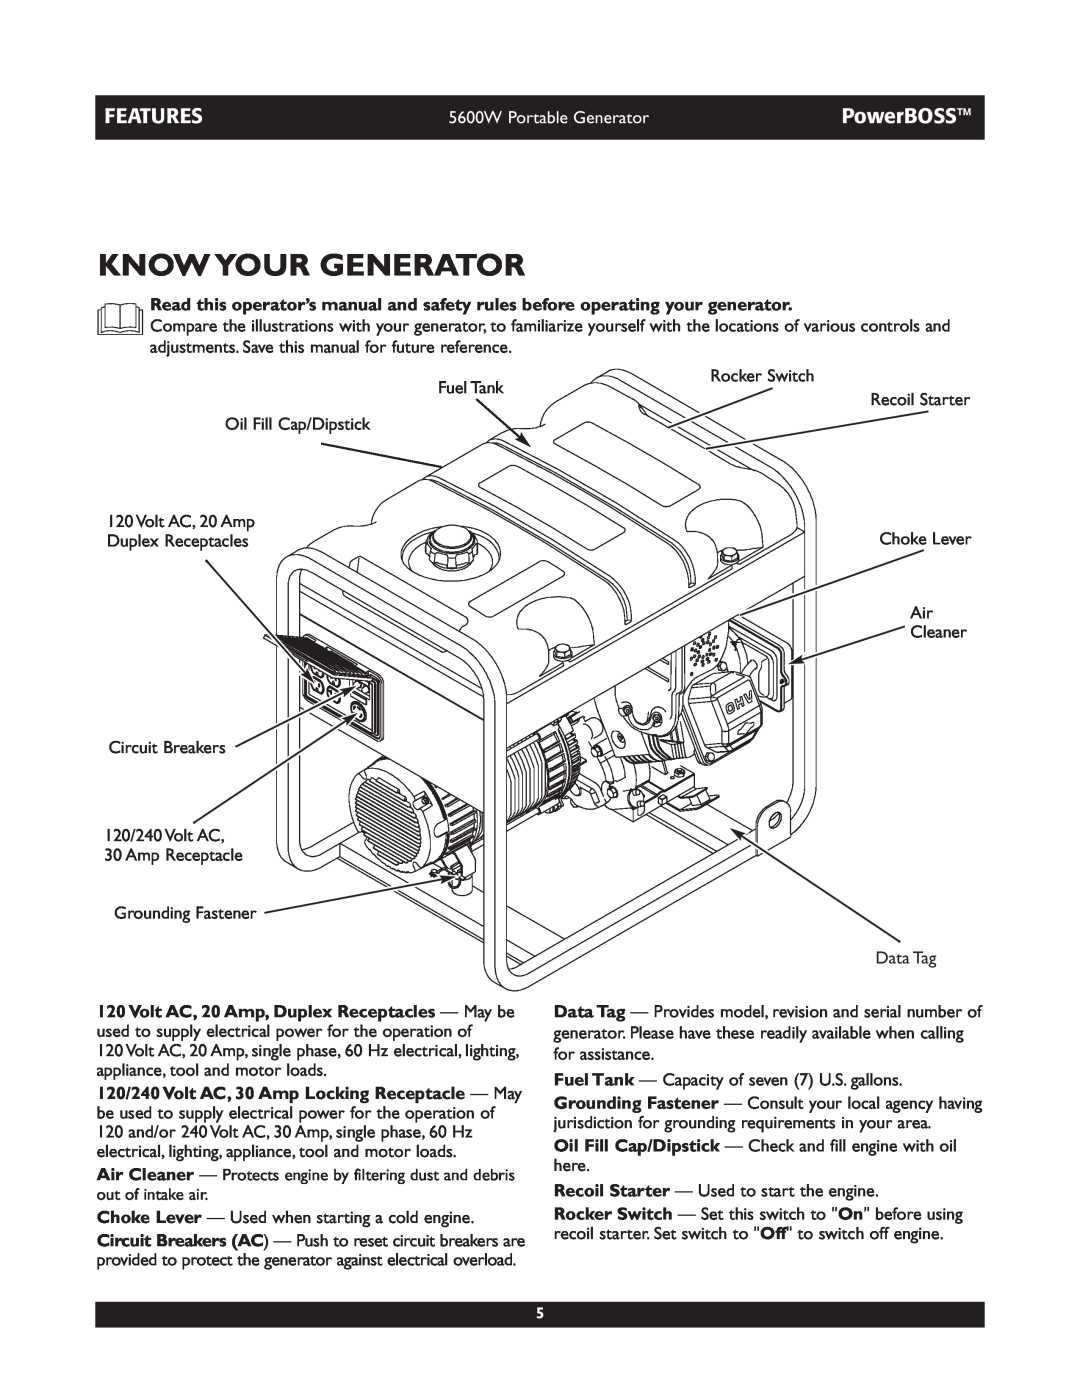 Briggs & Stratton 30230 manual Know Your Generator, Features, PowerBOSS, 5600W Portable Generator 